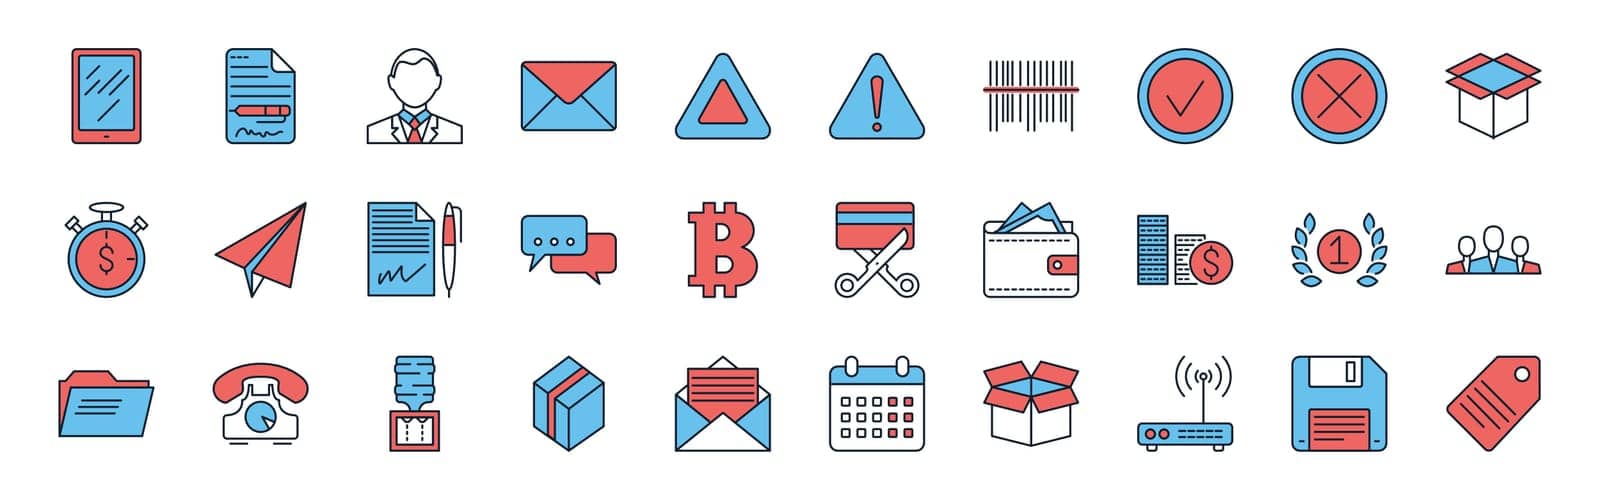 Set vector business, banking and finance icons set. Icons for business, management, finance, strategy, banking, marketing and accounting for mobile concepts and web. Modern pictogram